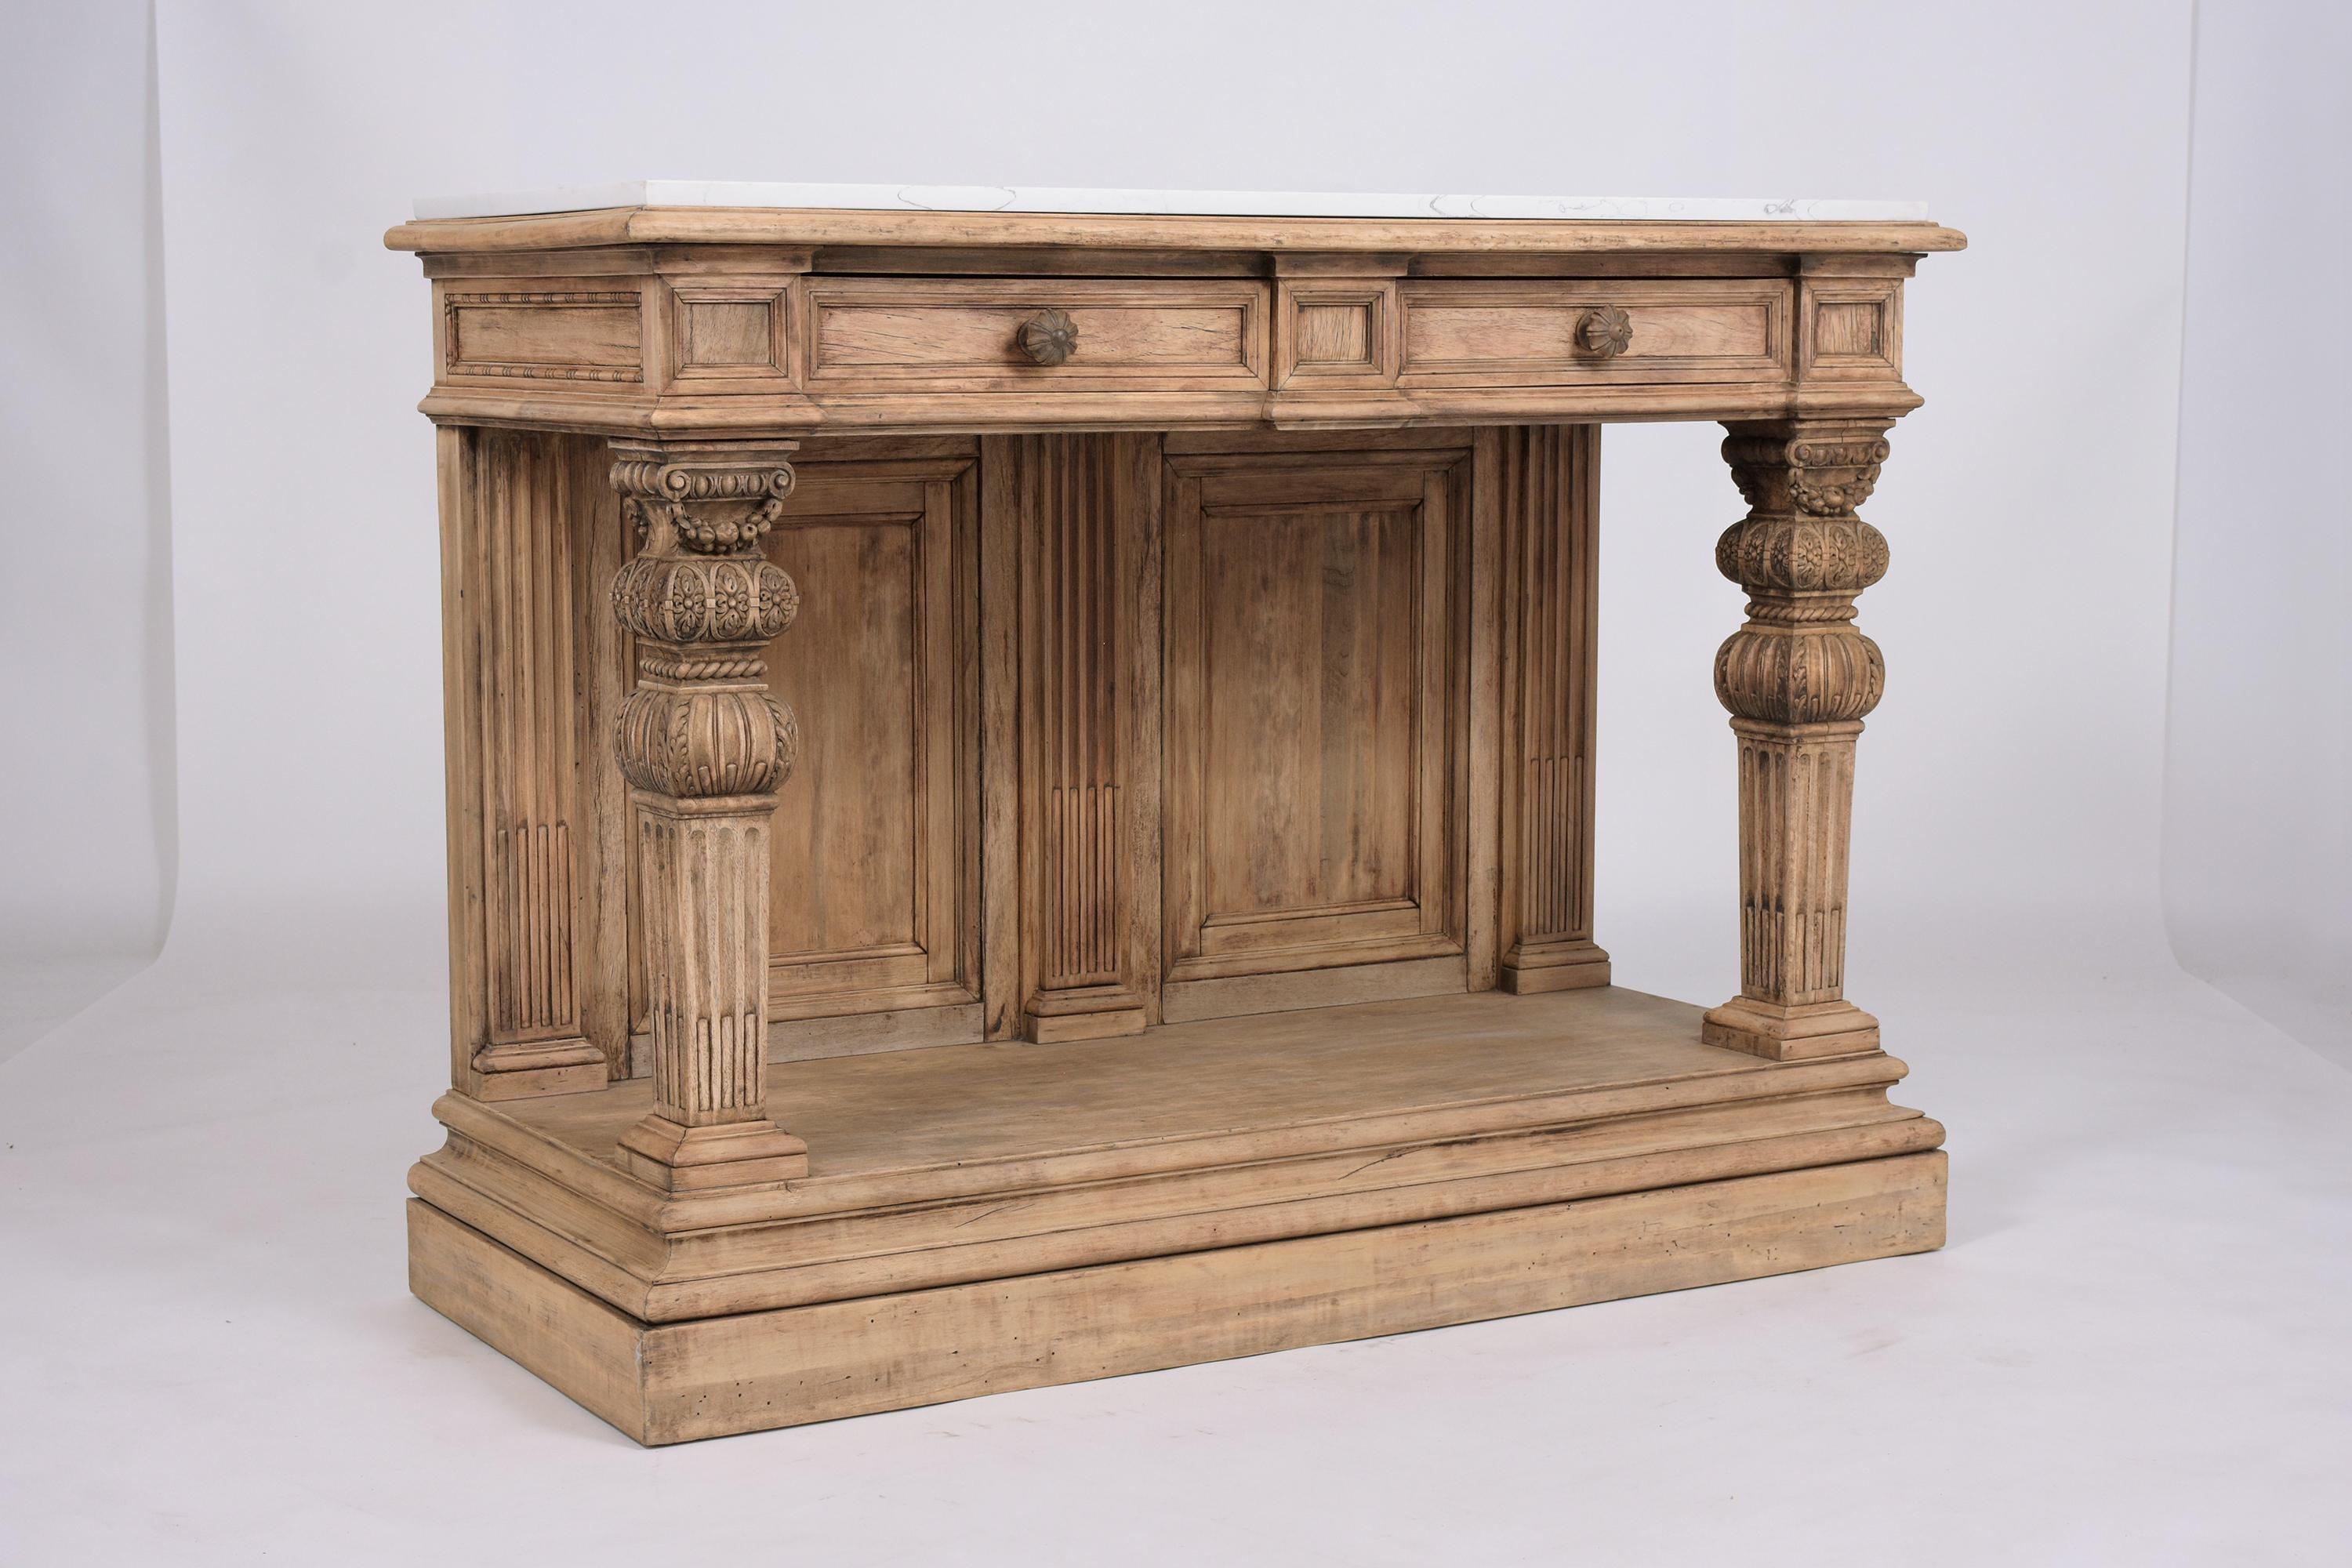 Polished 1880s Antique Baroque Carved Console with Marble Top: Historical Elegance Revive